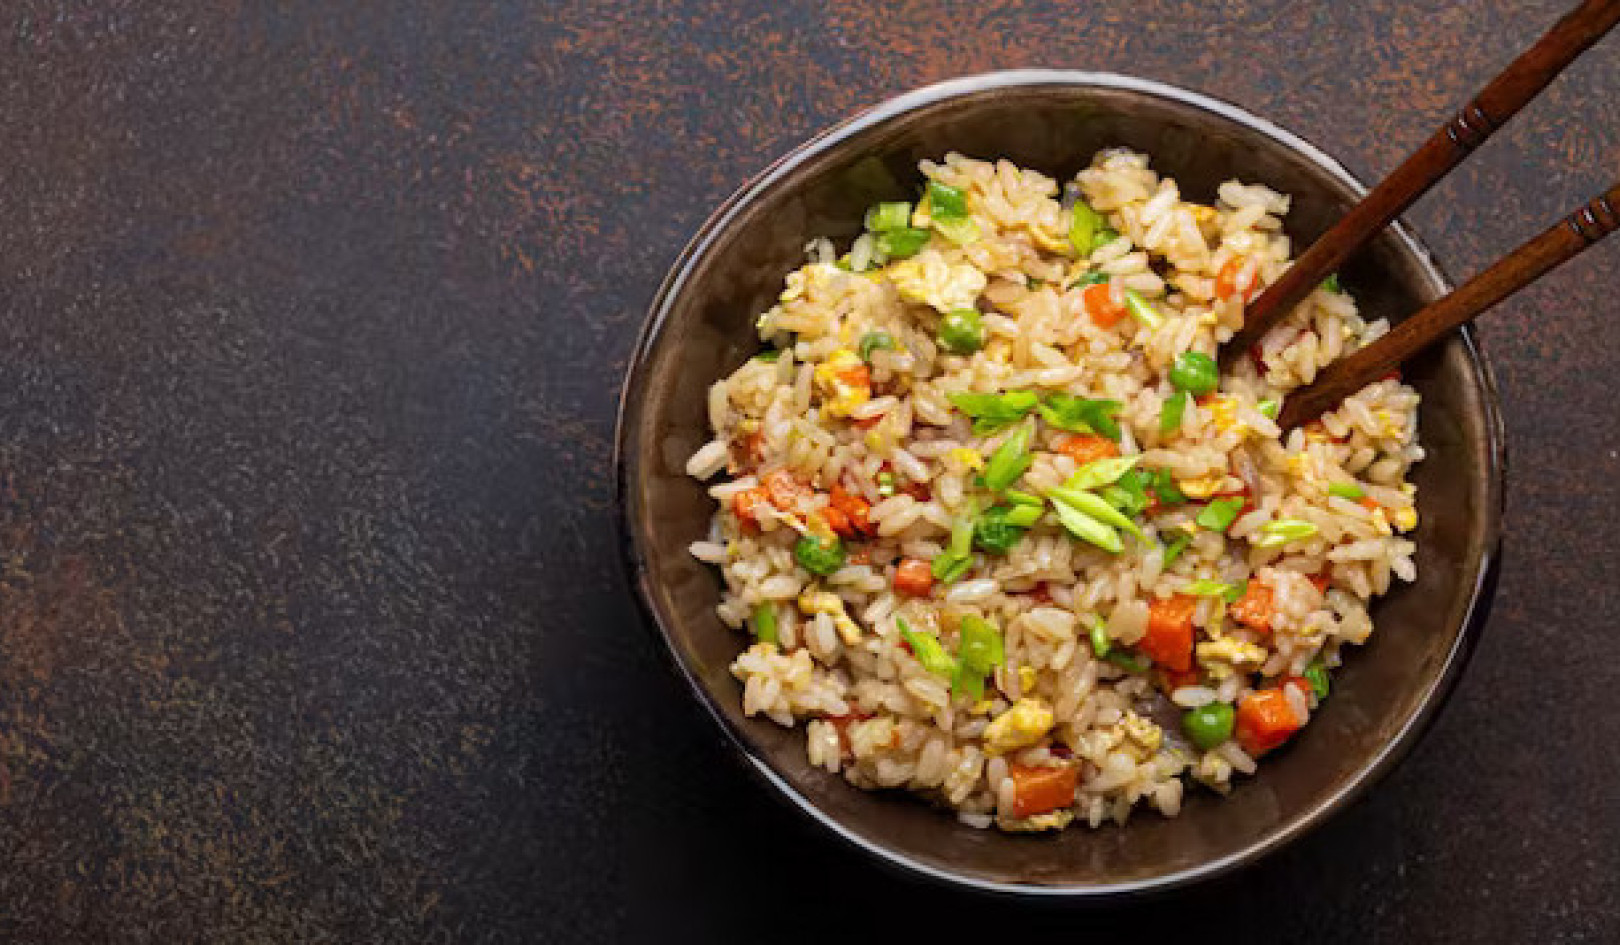 How Leftovers Could Lead to 'Fried Rice Syndrome